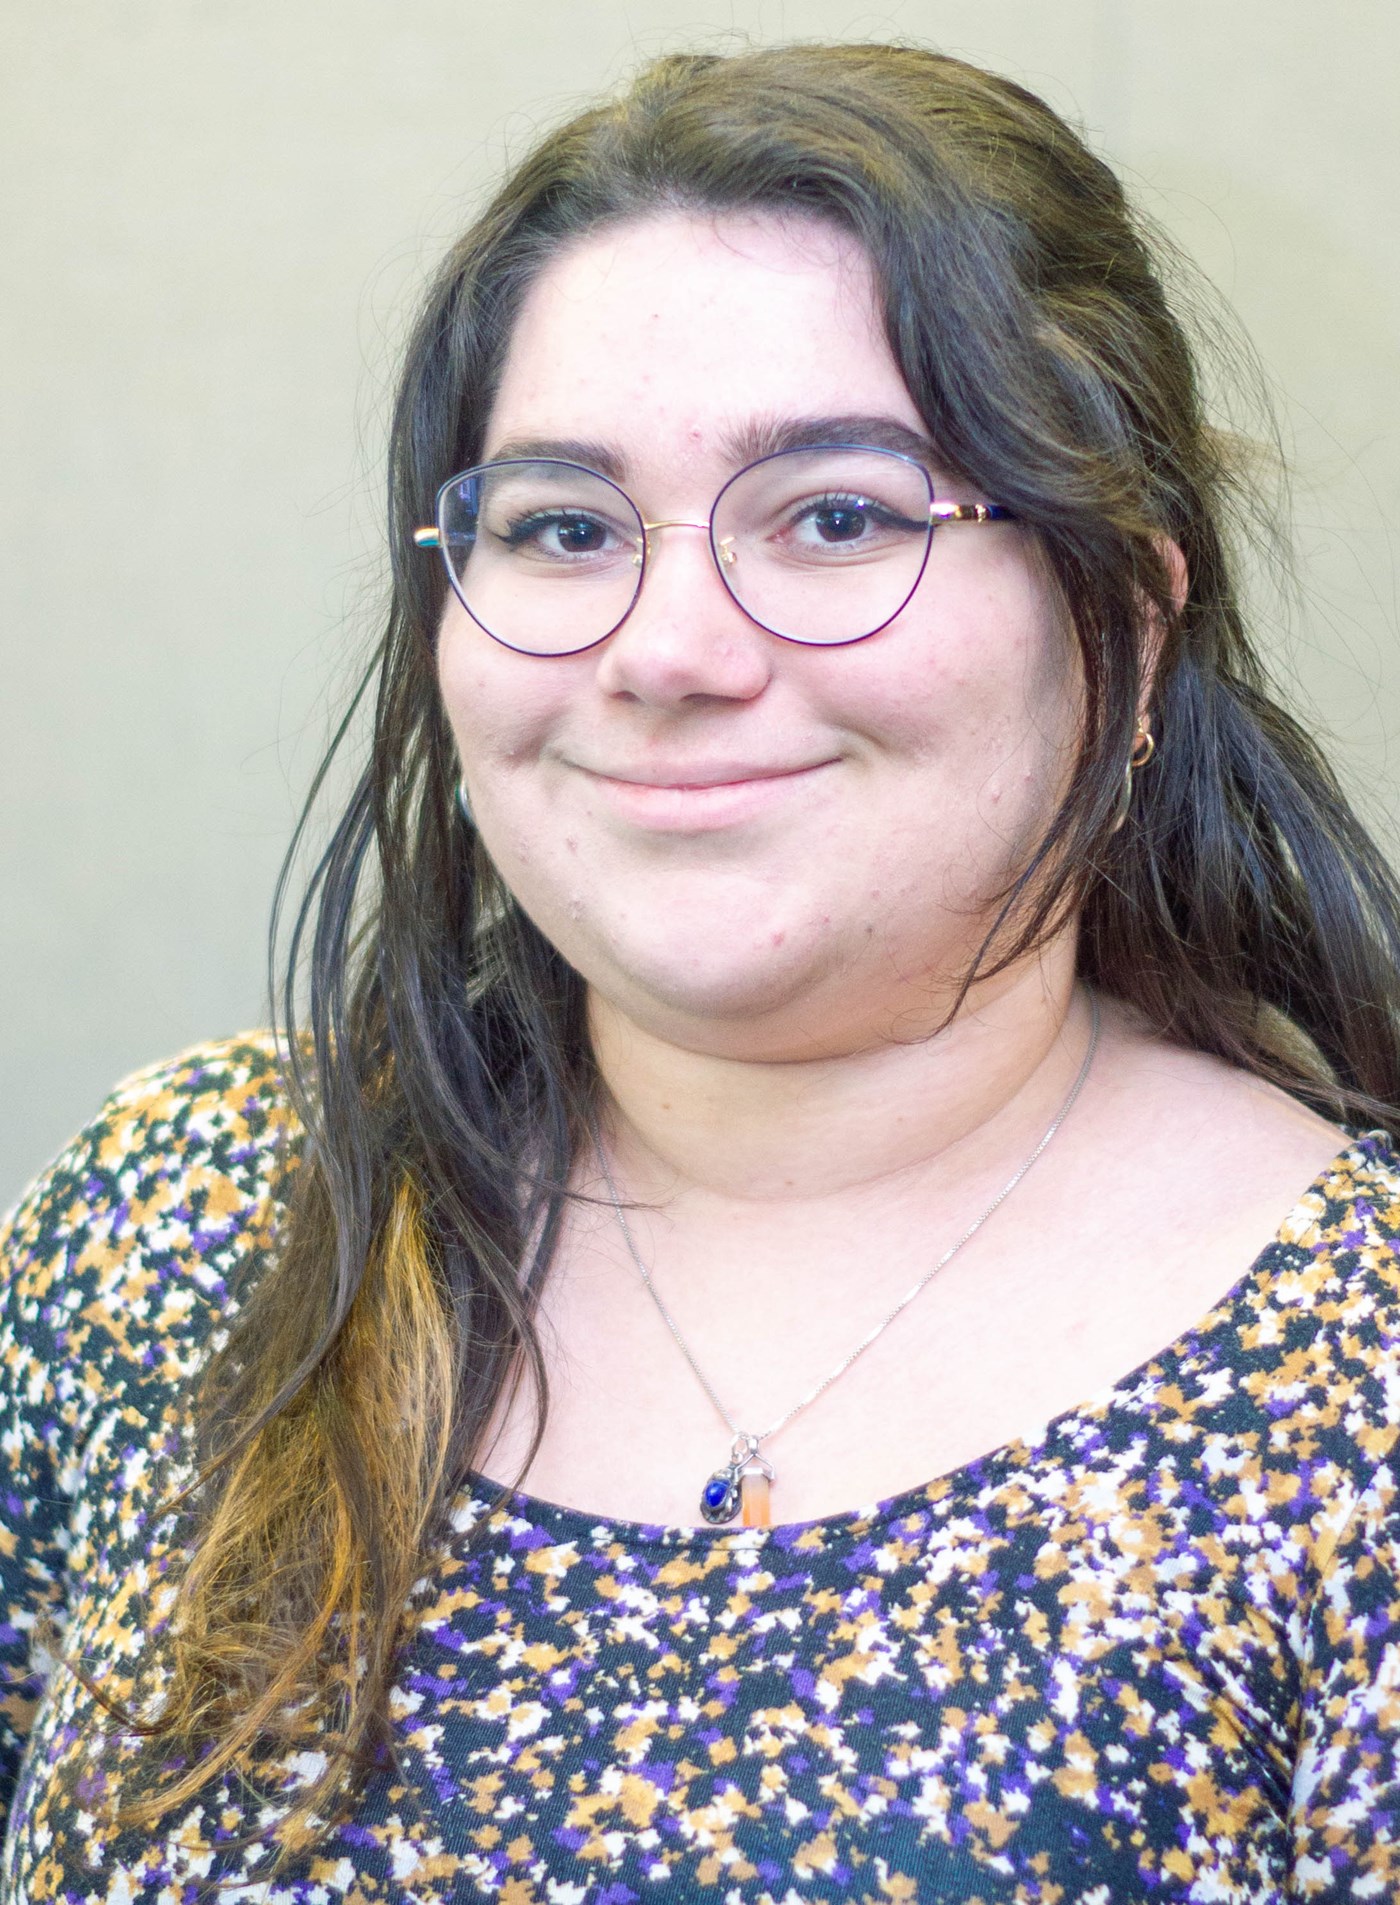 Hannah Patrignani wearing glasses and a necklace and smiling at the camera.